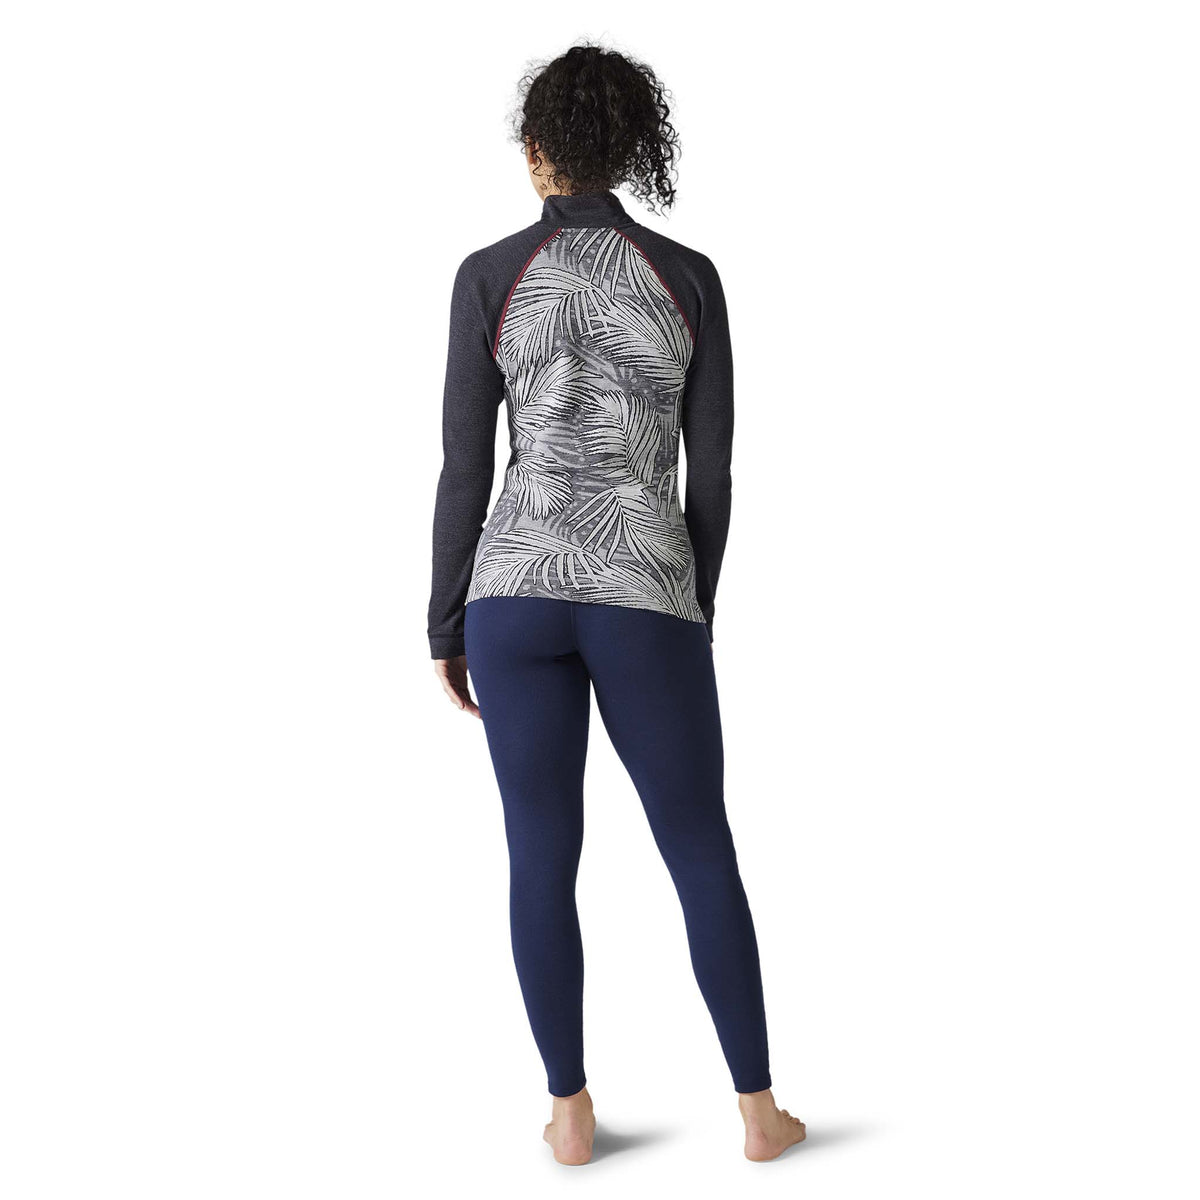 Smartwool Merino 250 baselayer manches longues light gray palm femme dos